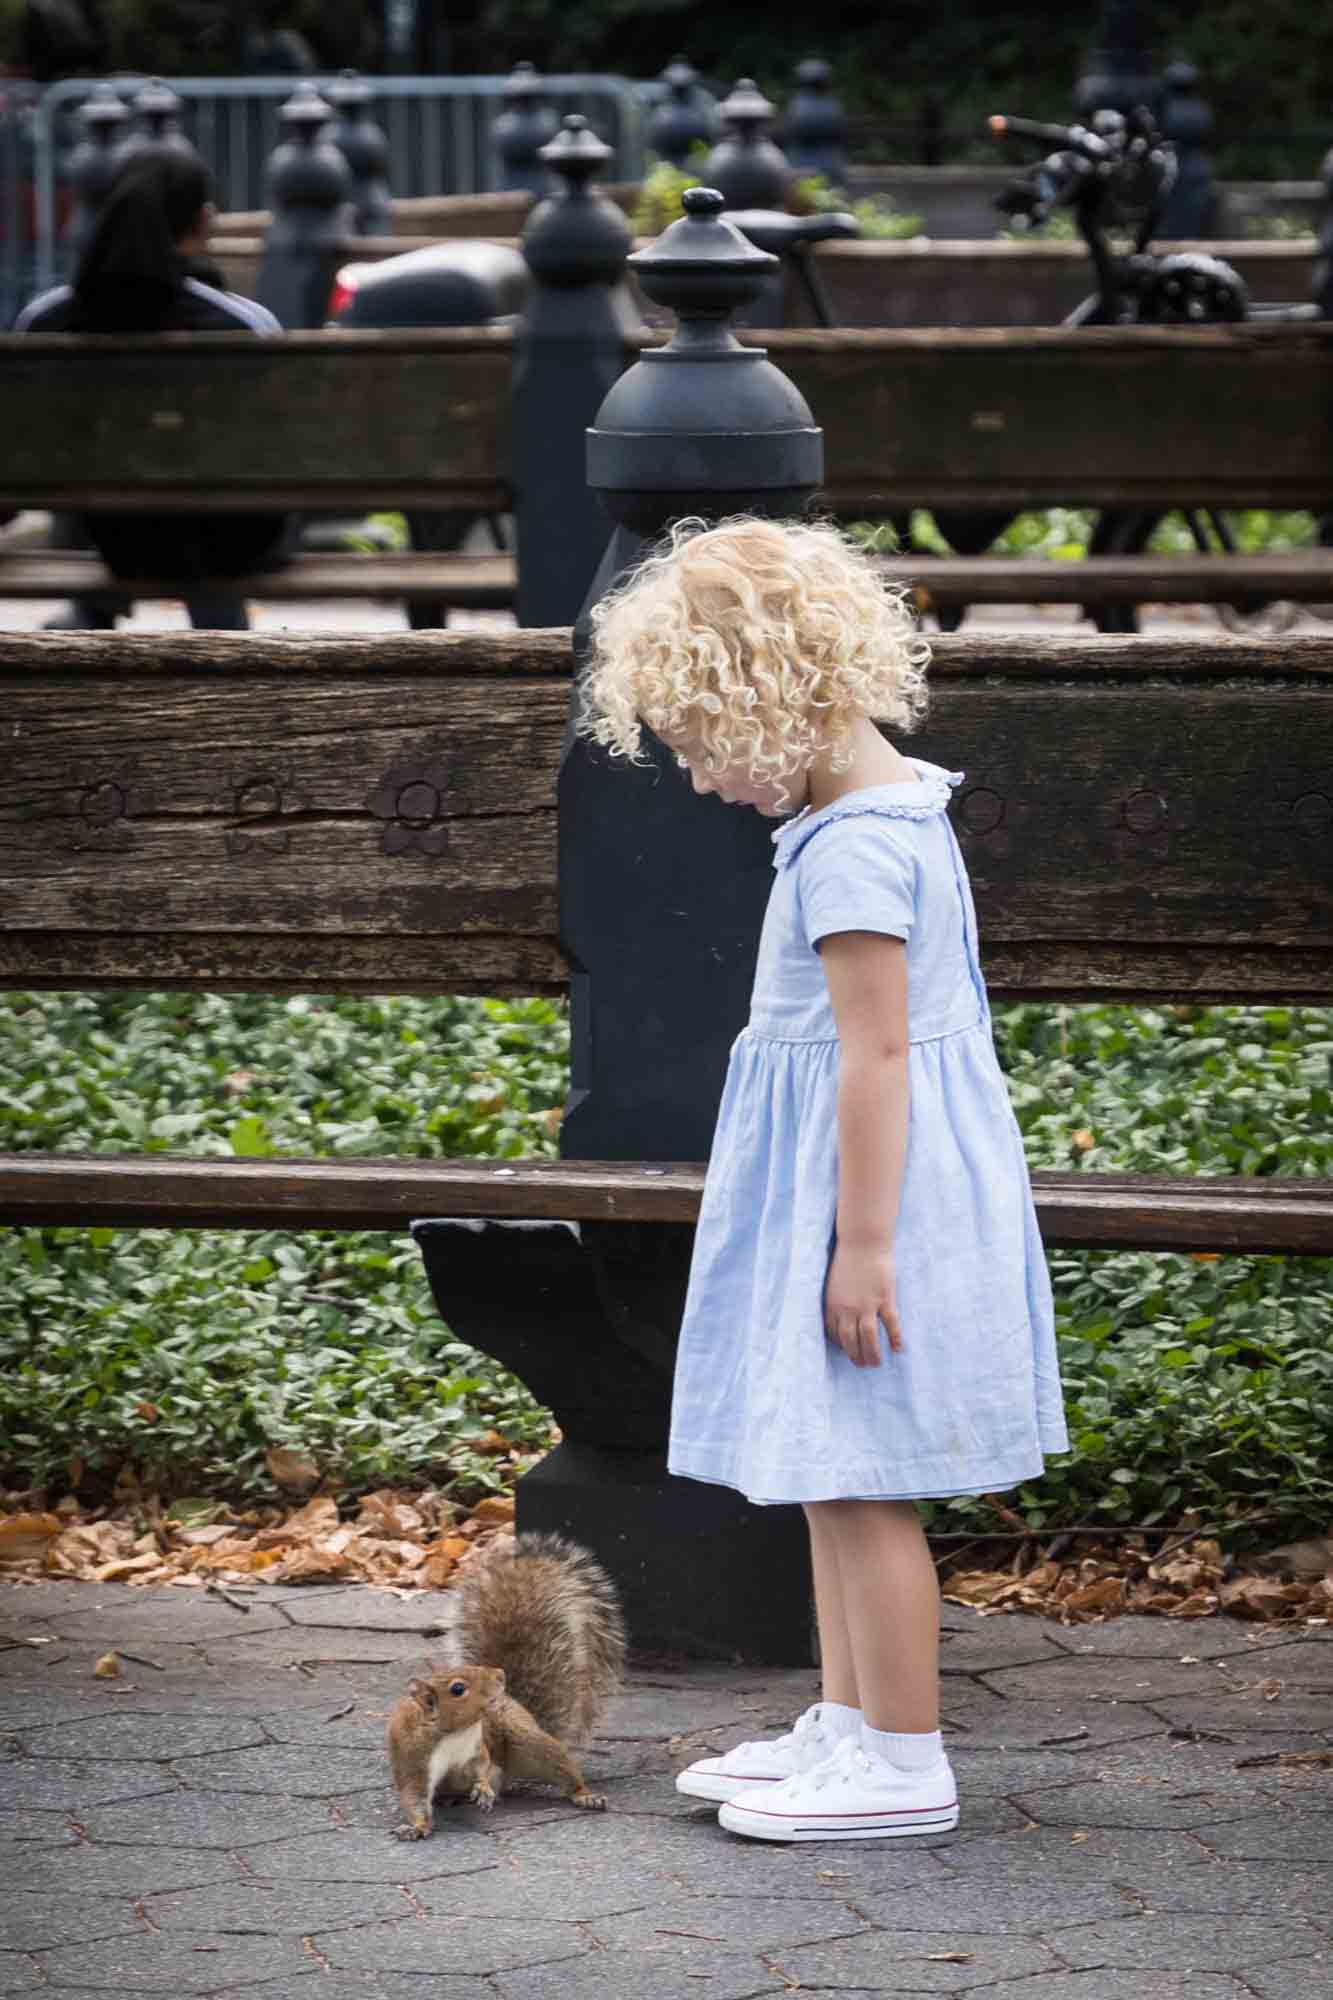 Central Park family portrait of little blonde girl looking down at squirrel